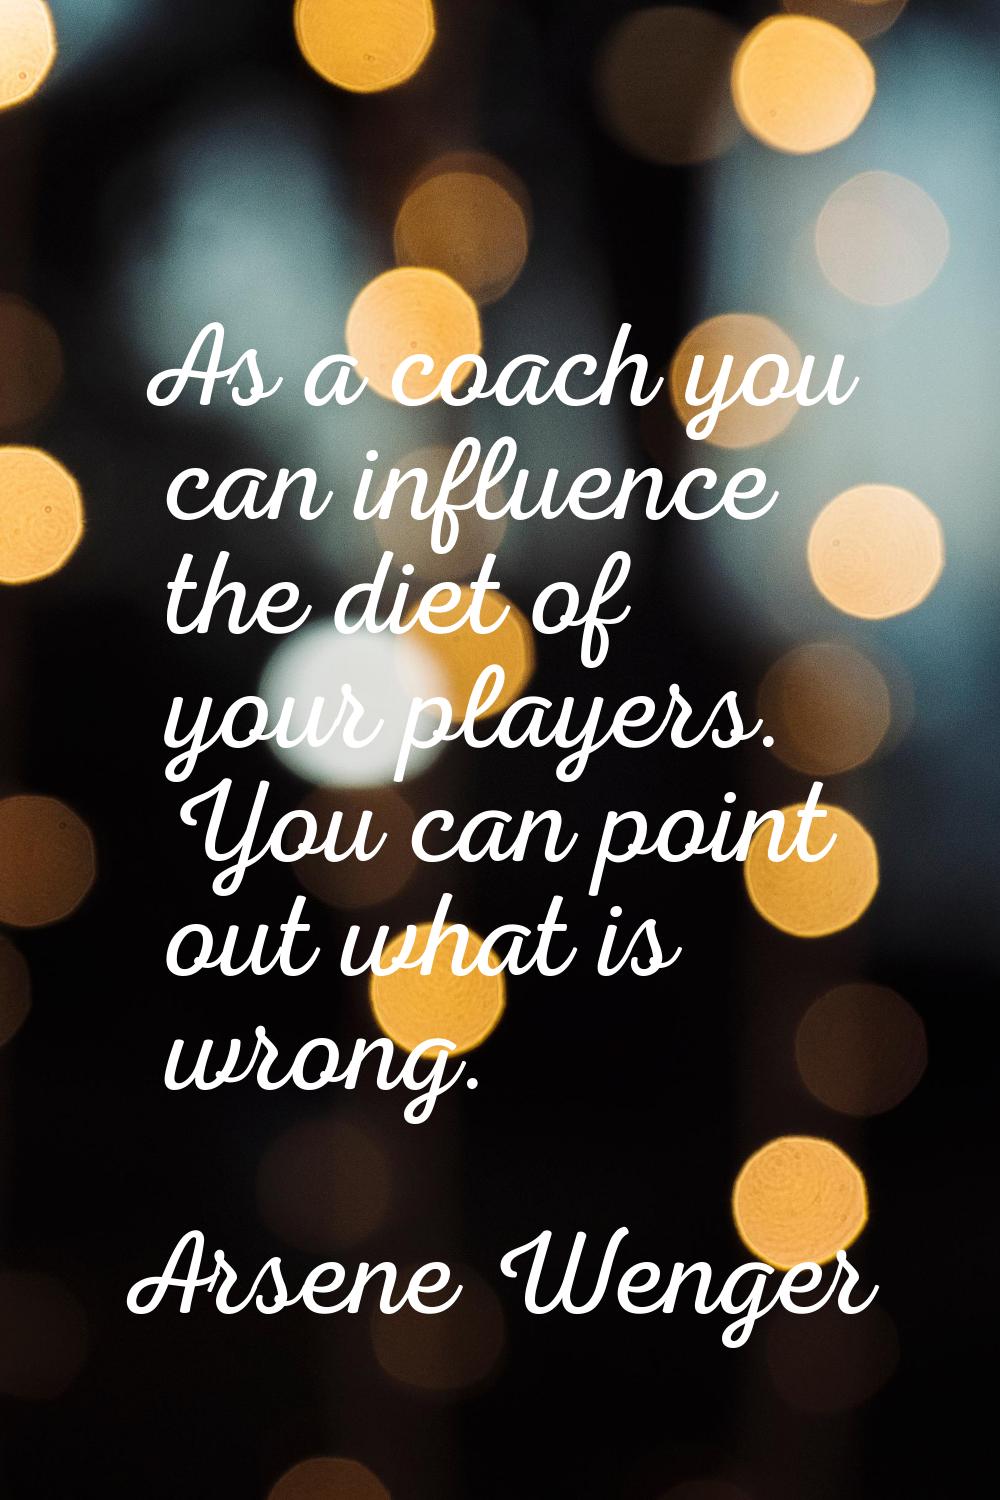 As a coach you can influence the diet of your players. You can point out what is wrong.